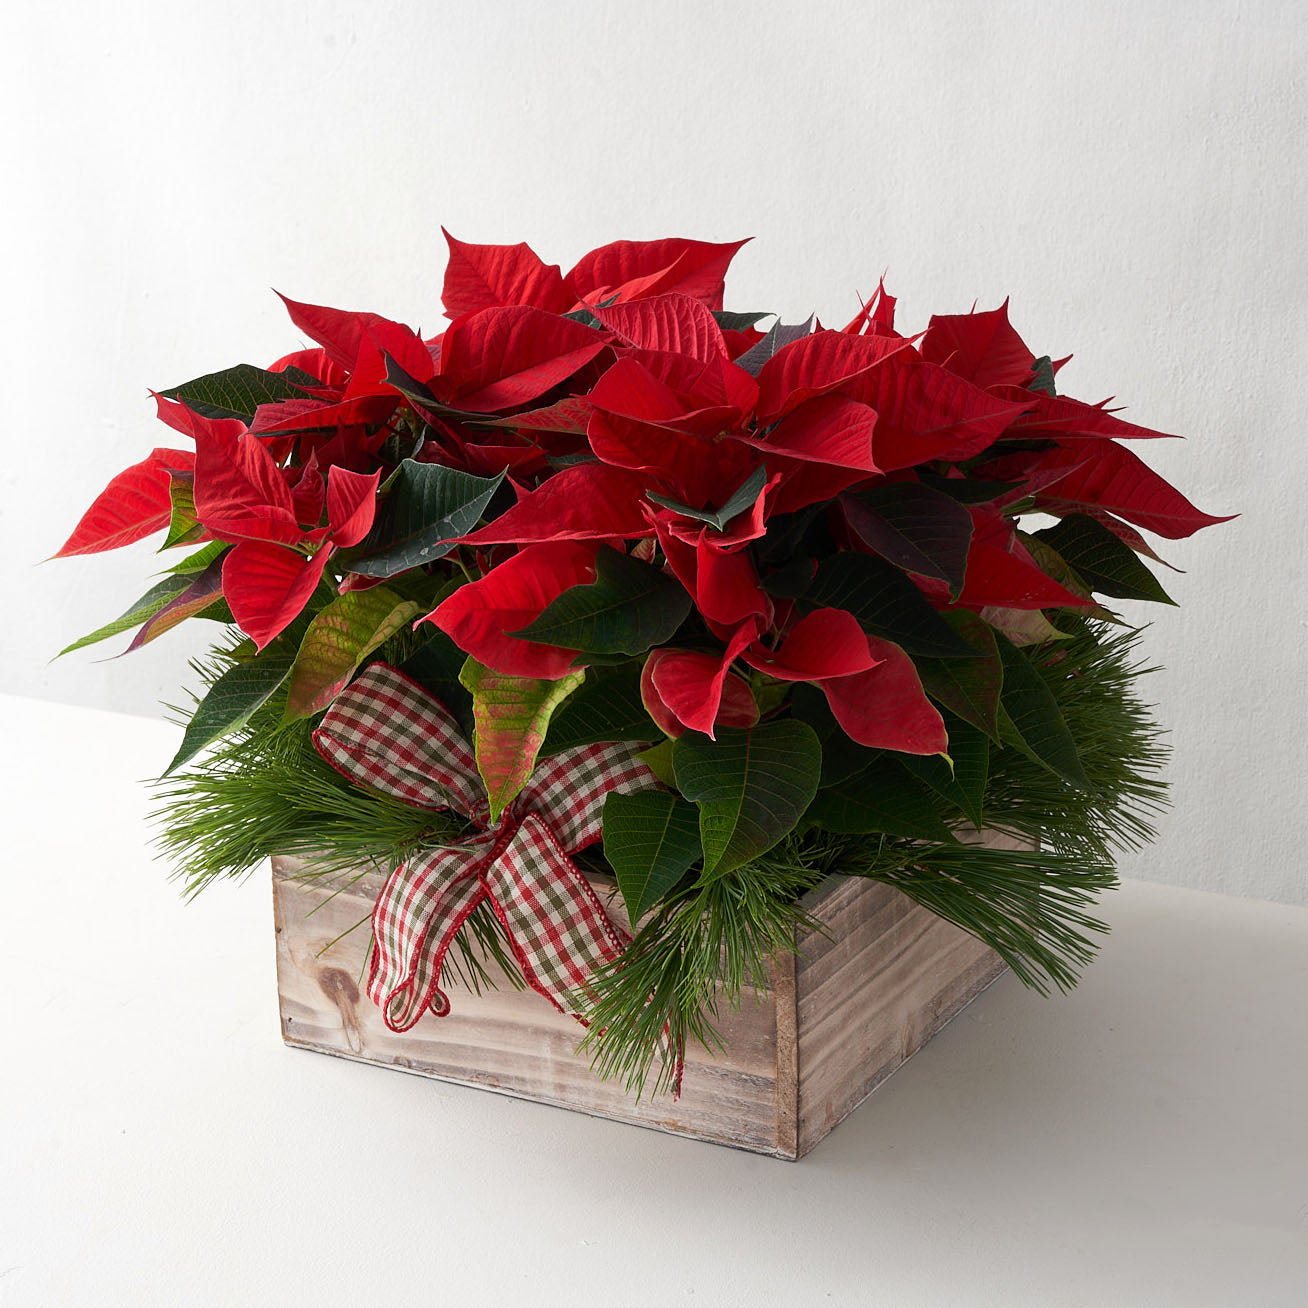 Red poinsettia in a wooden box with pine boughs and a red and green bow.